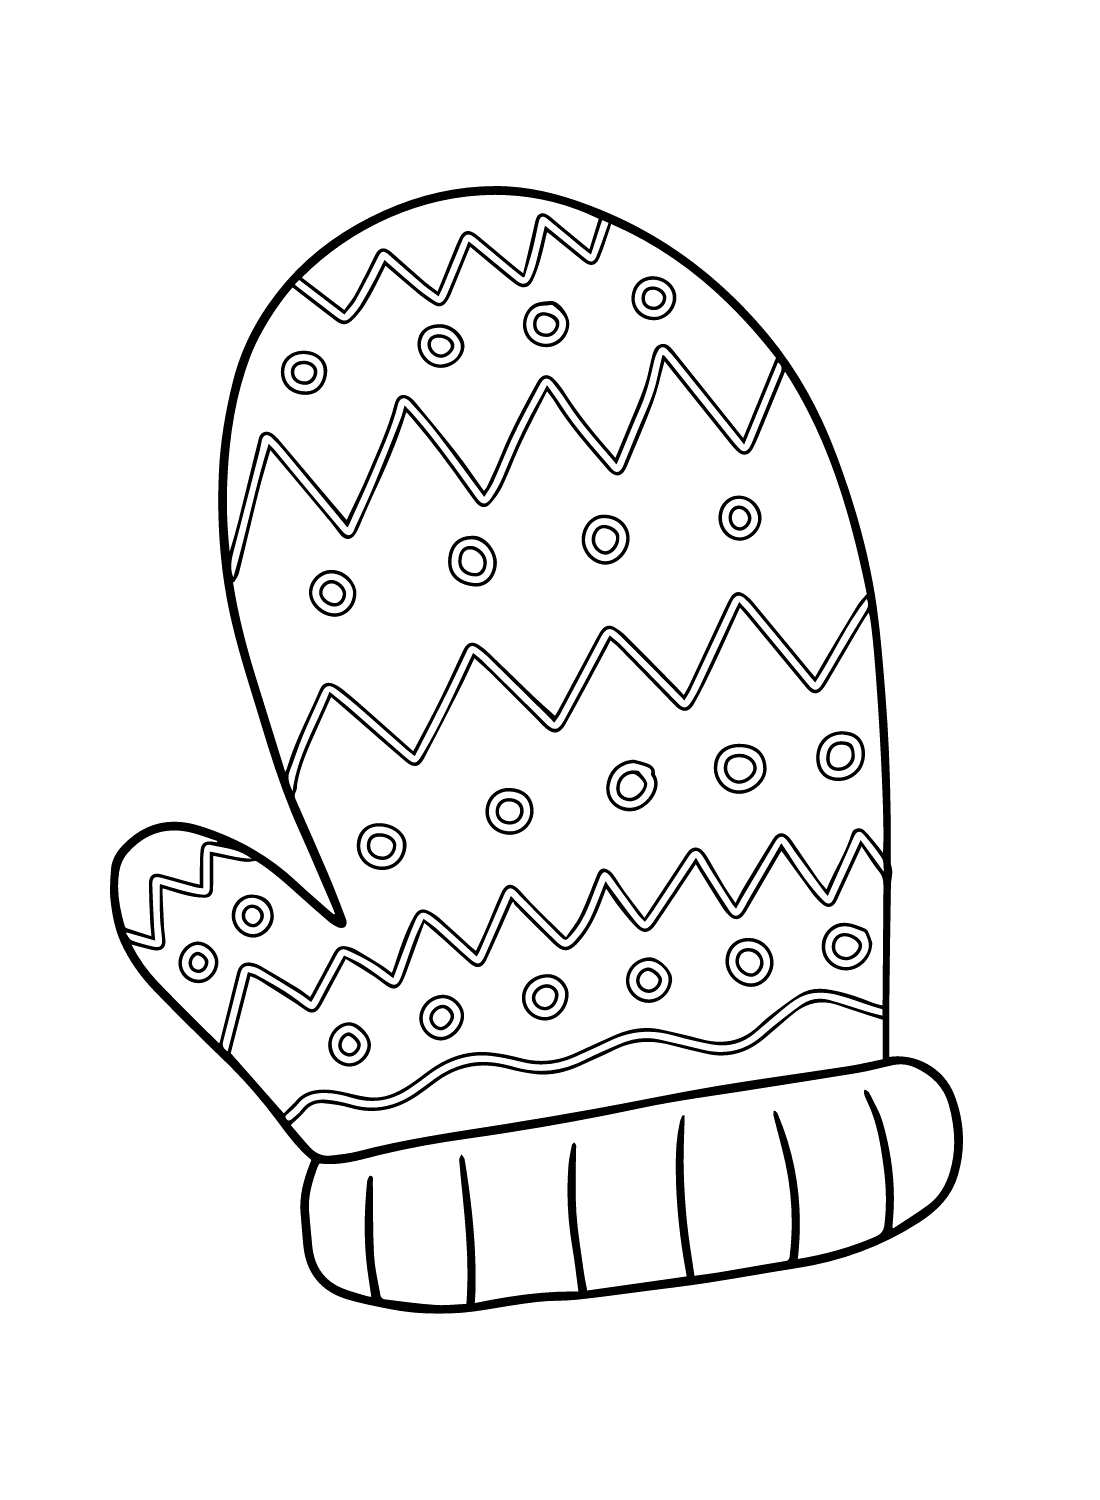 Mittens to Print Coloring Page